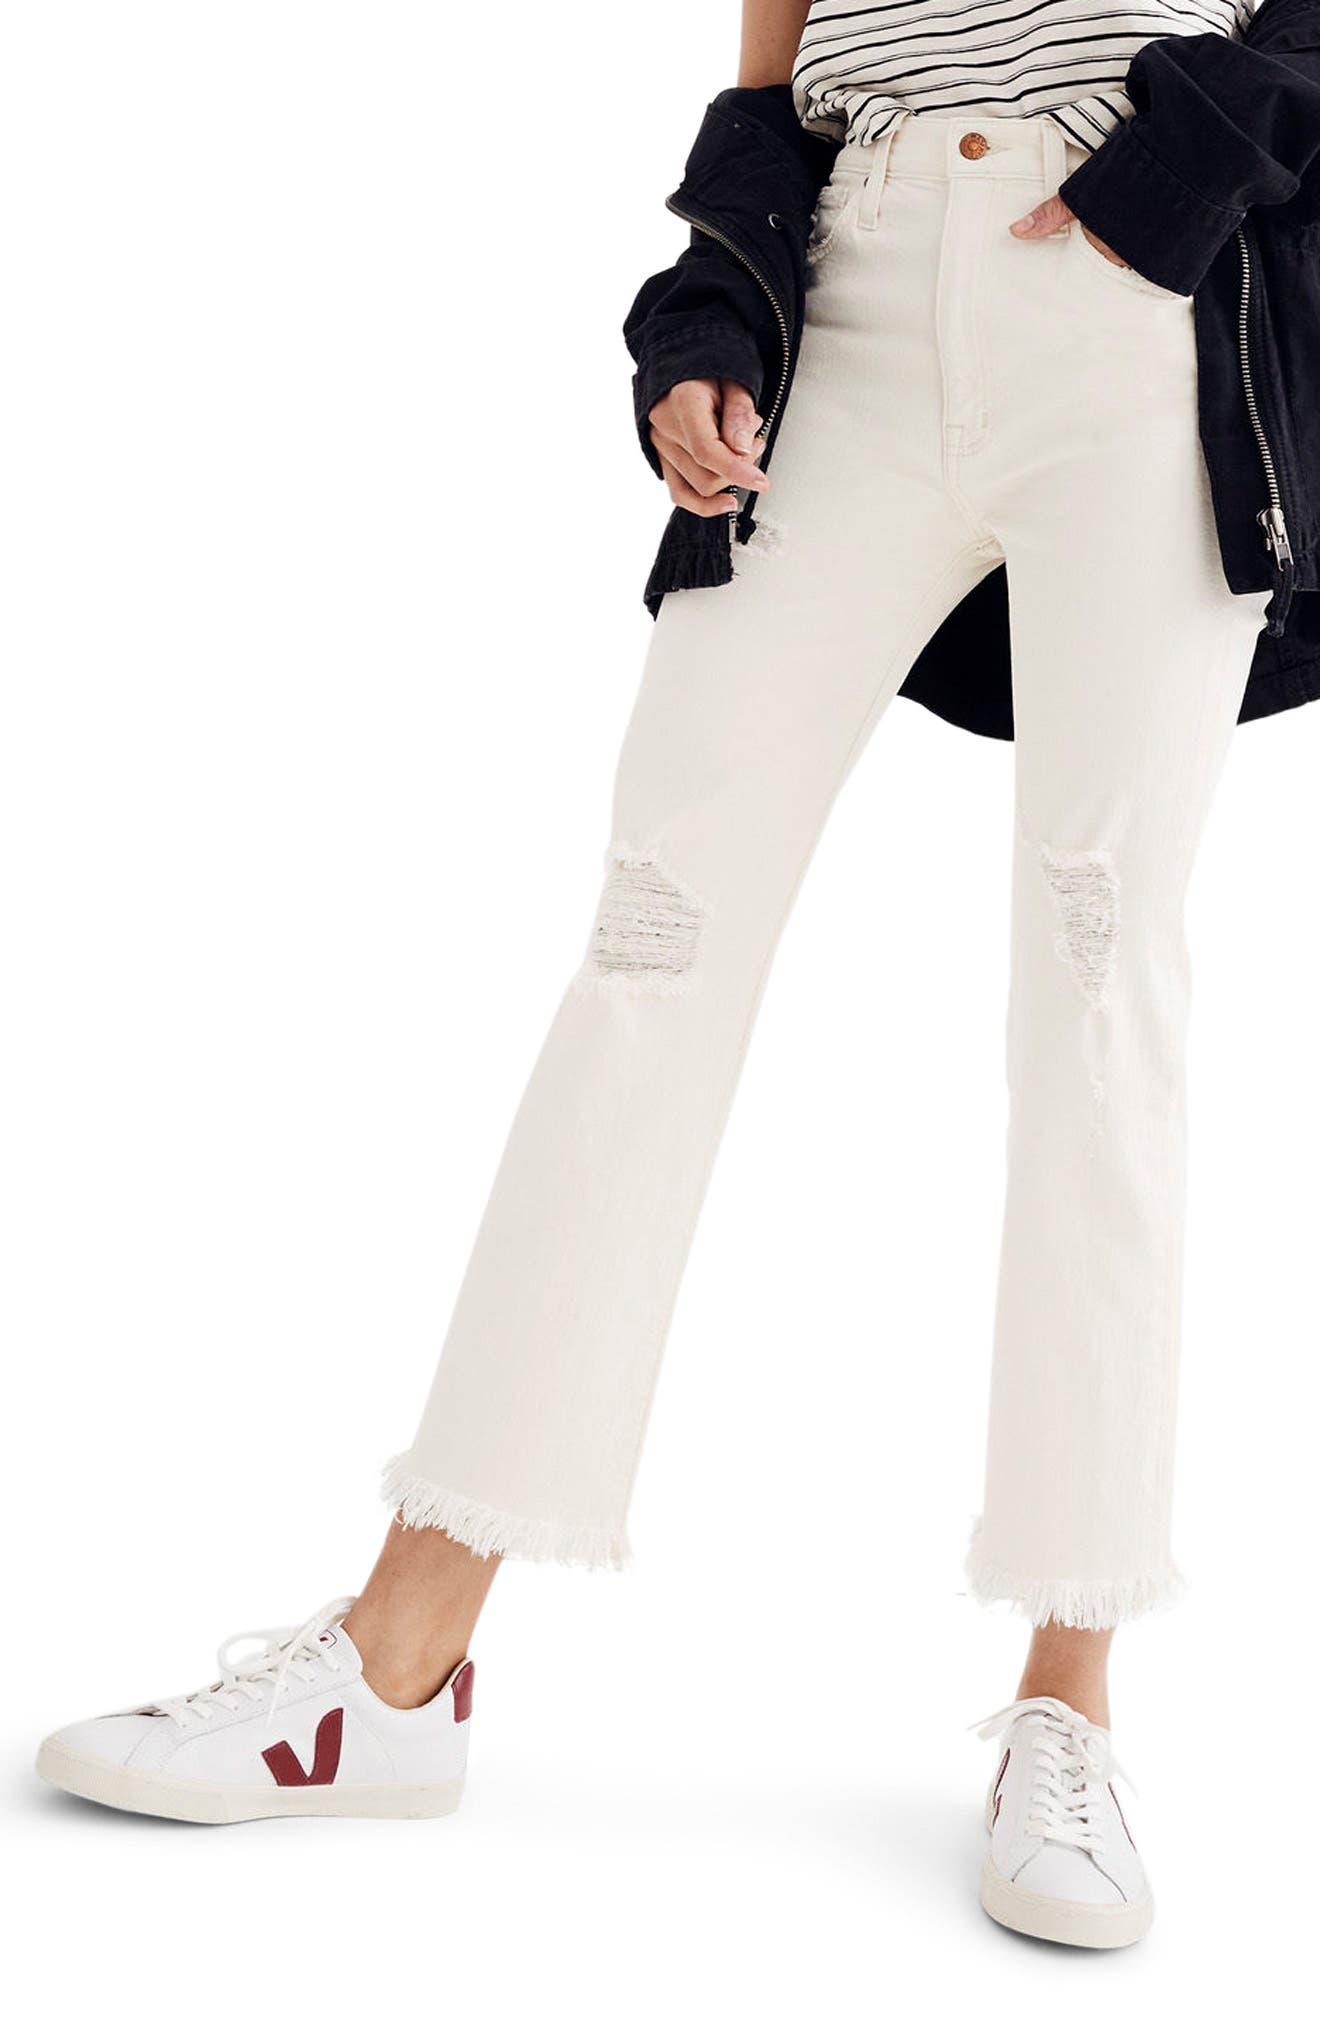 madewell white jeans nordstrom